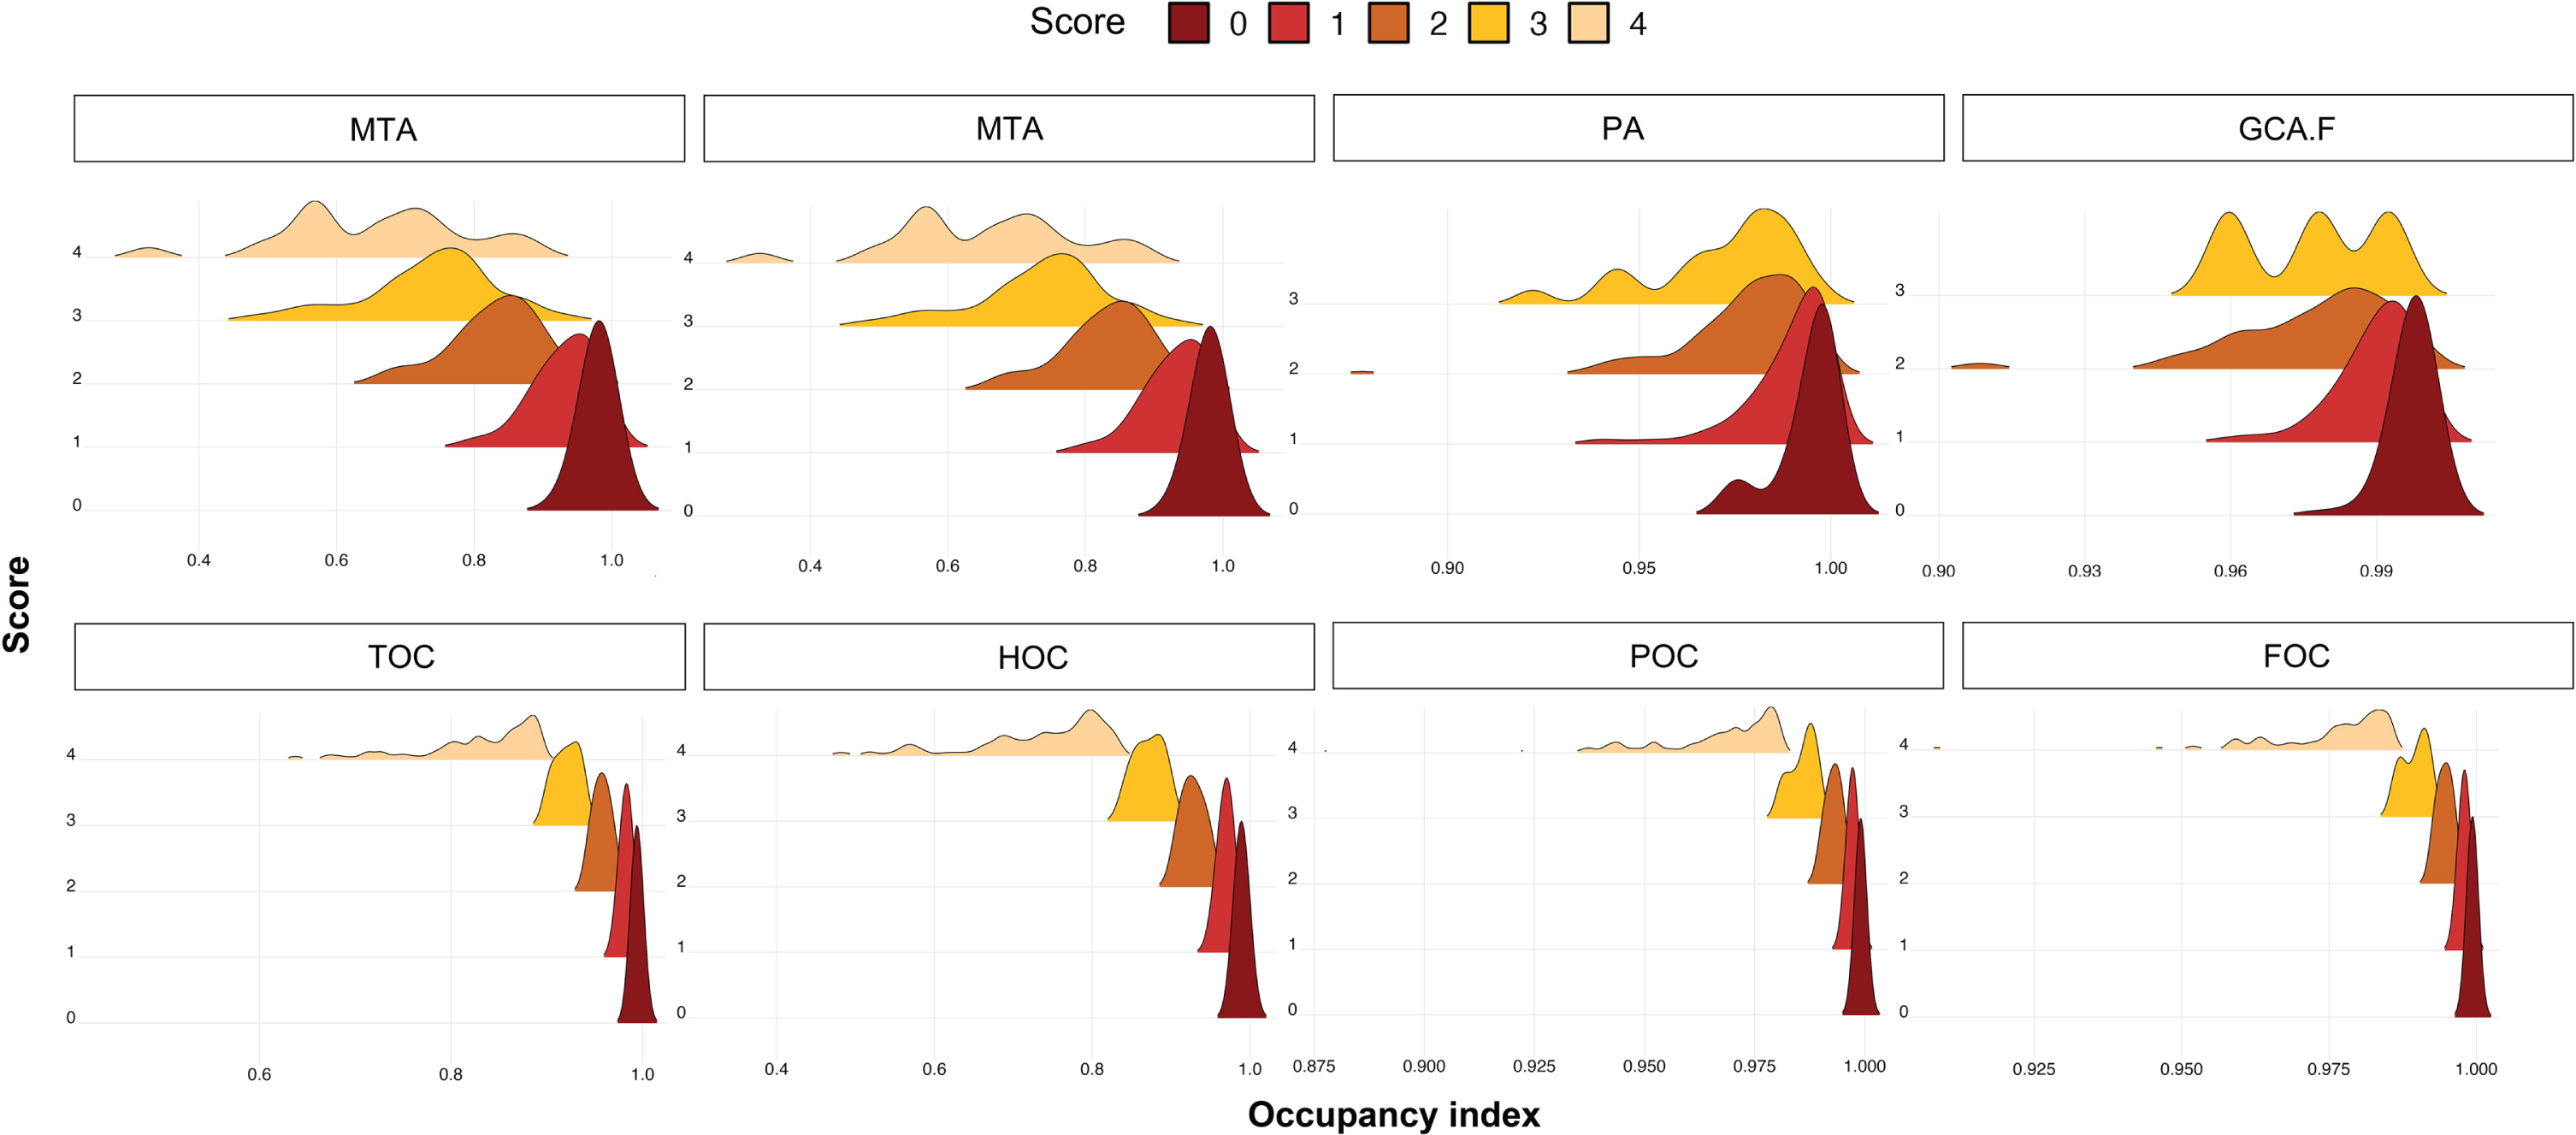 Comparison of regional score data distribution between visual assessment (upper figures) and automated scores (bottom figures) across regional occupancy indices. MTA, medial temporal atrophy score; GCA-F, global cortical atrophy score of the frontal lobe; PA, posterior atrophy score; HOC, hippocampus occupancy index; TOC, medial temporal lobe occupancy index; FOC, frontal lobe occupancy index; POC, parietal lobe occupancy index.